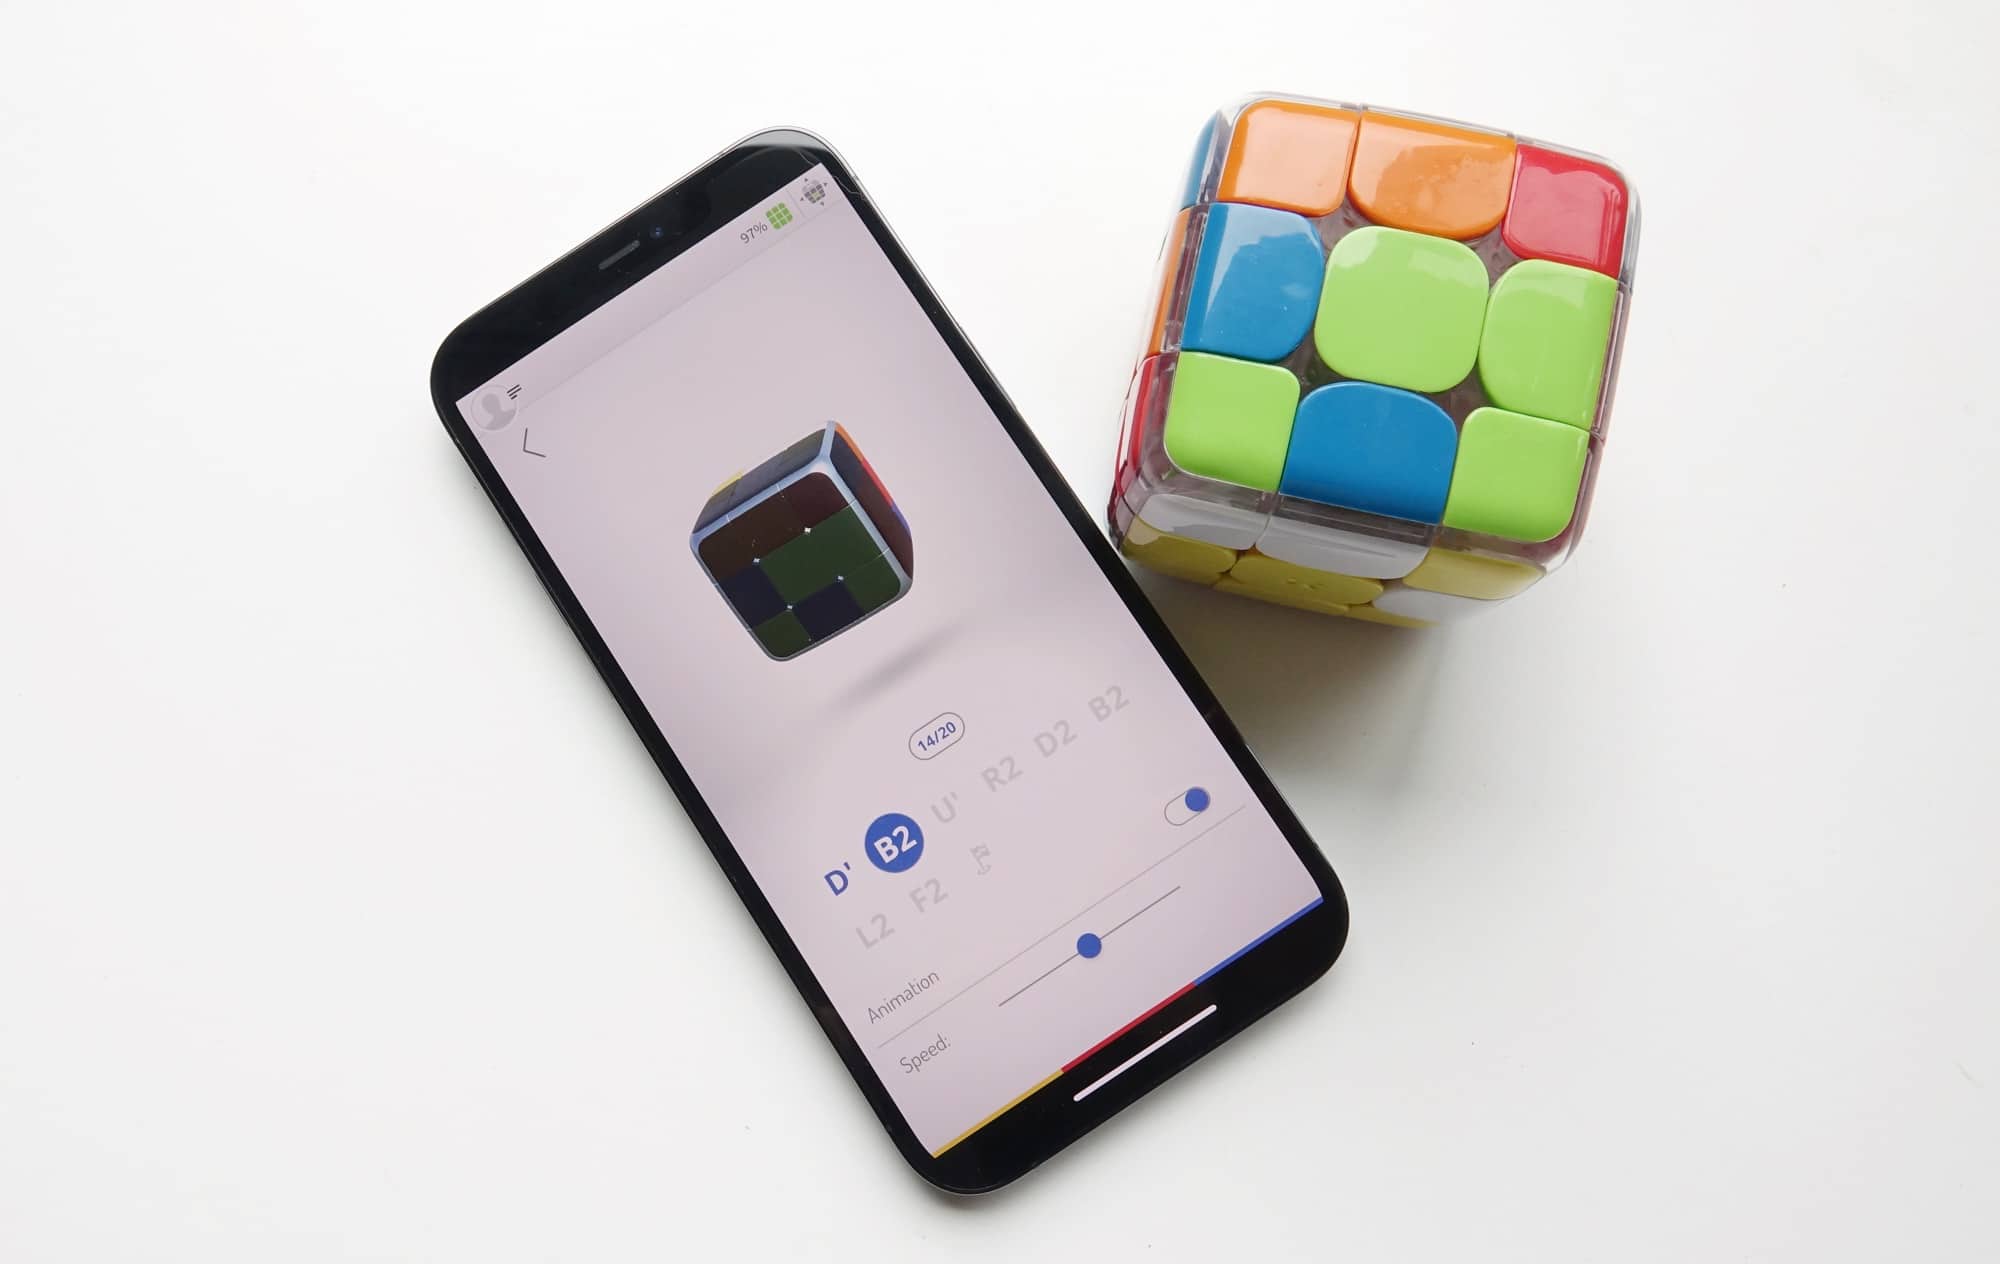 Solving the Rubik's Cube with the GoCube